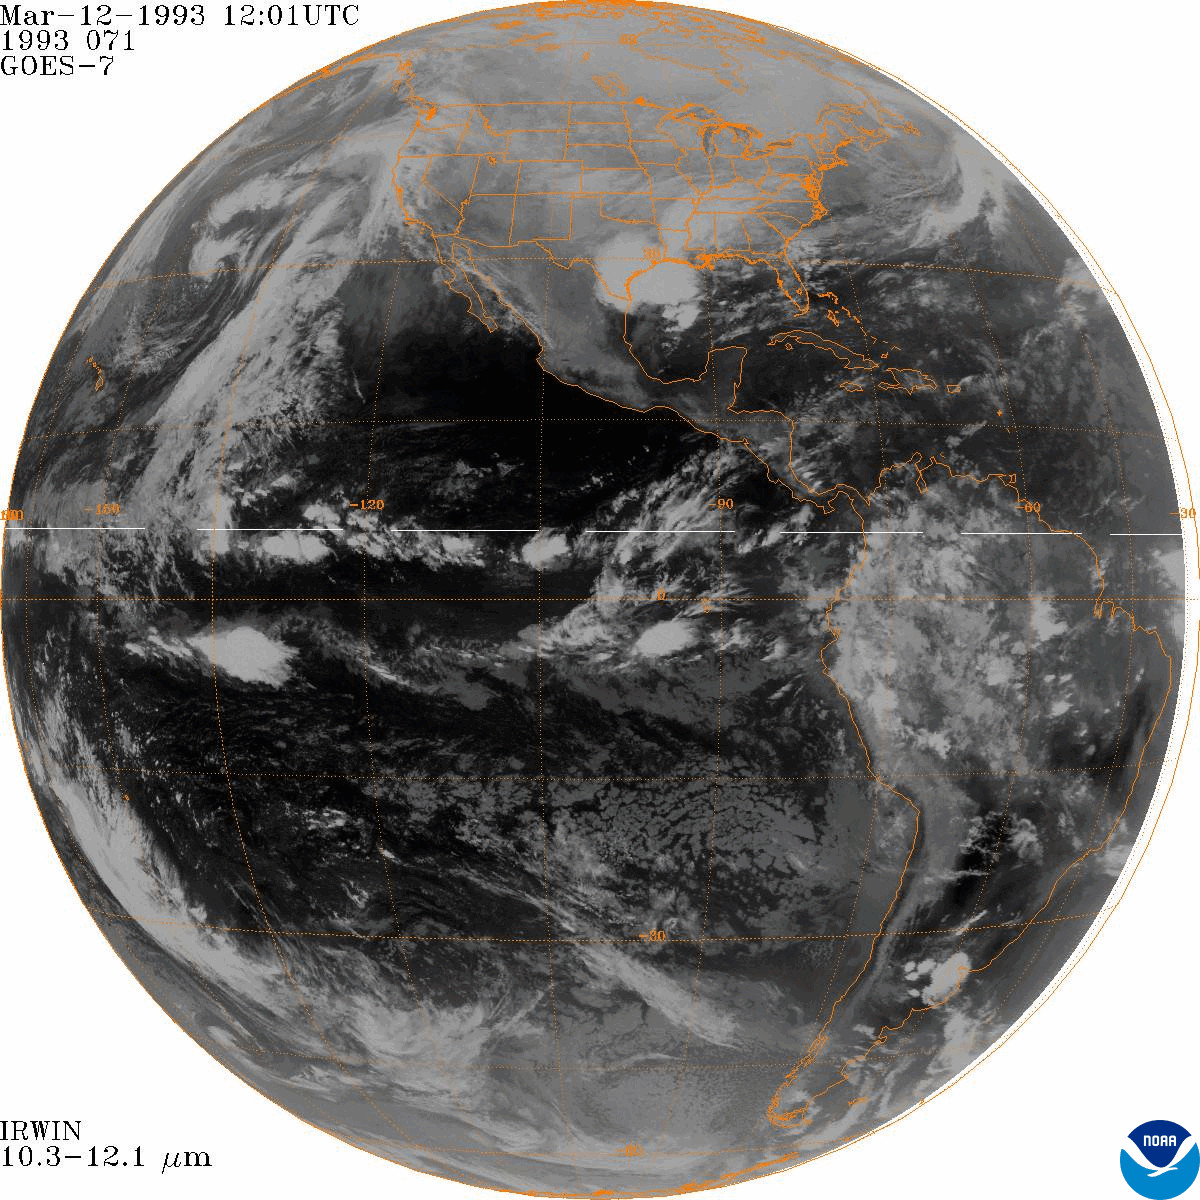 A full-disk GOES-7 infrared satellite animation of the Storm of the Century from March 12–14, 1993.